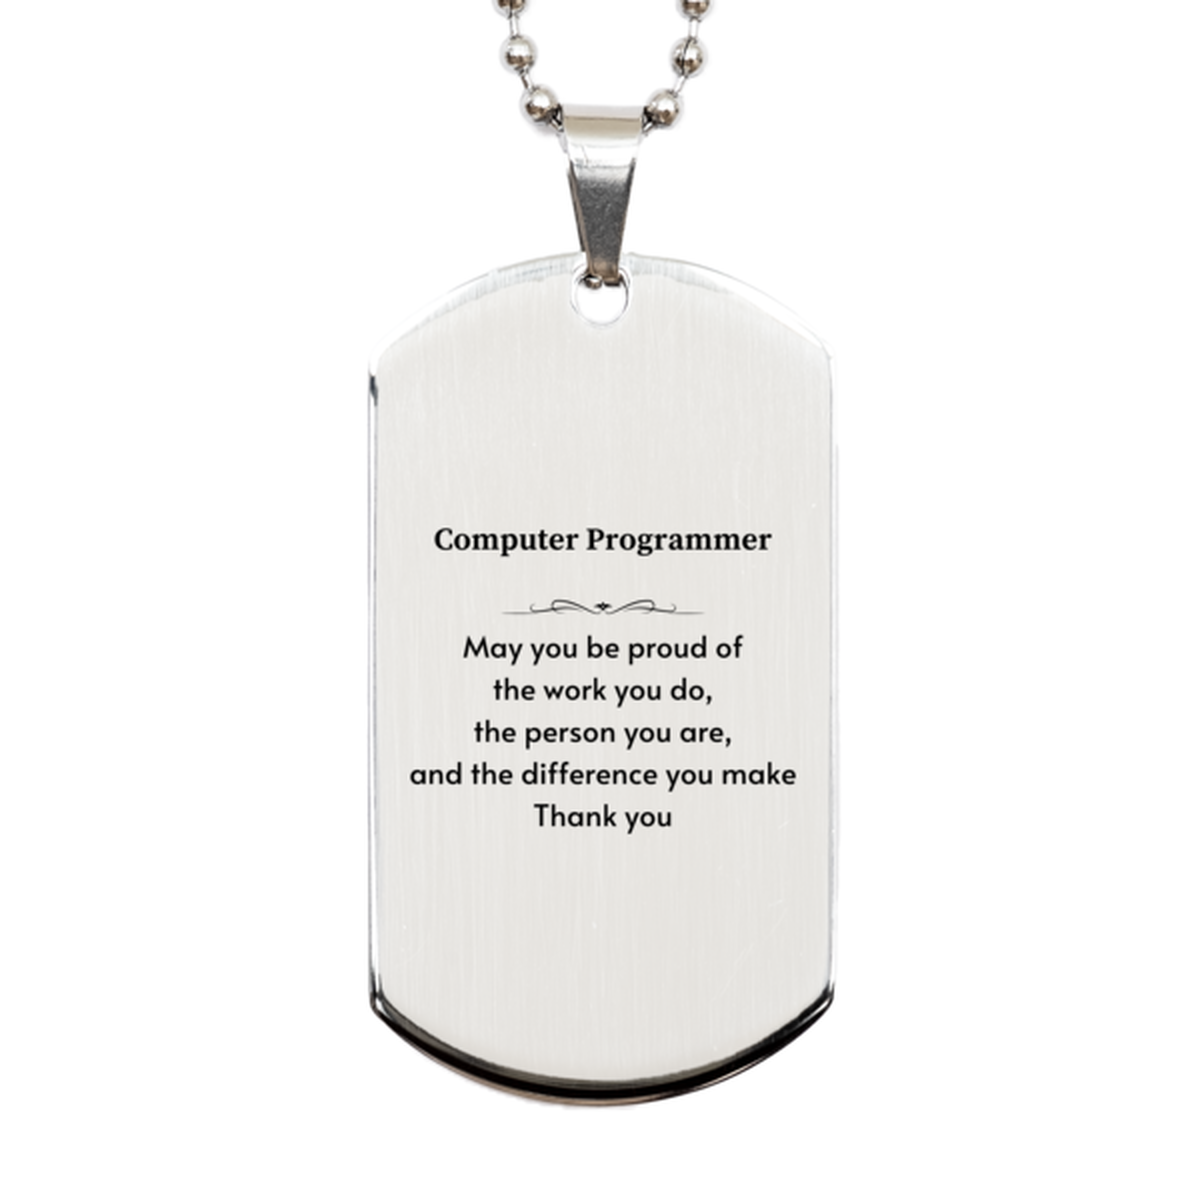 Heartwarming Silver Dog Tag Retirement Coworkers Gifts for Computer Programmer, Computer Programmer May You be proud of the work you do, the person you are Gifts for Boss Men Women Friends